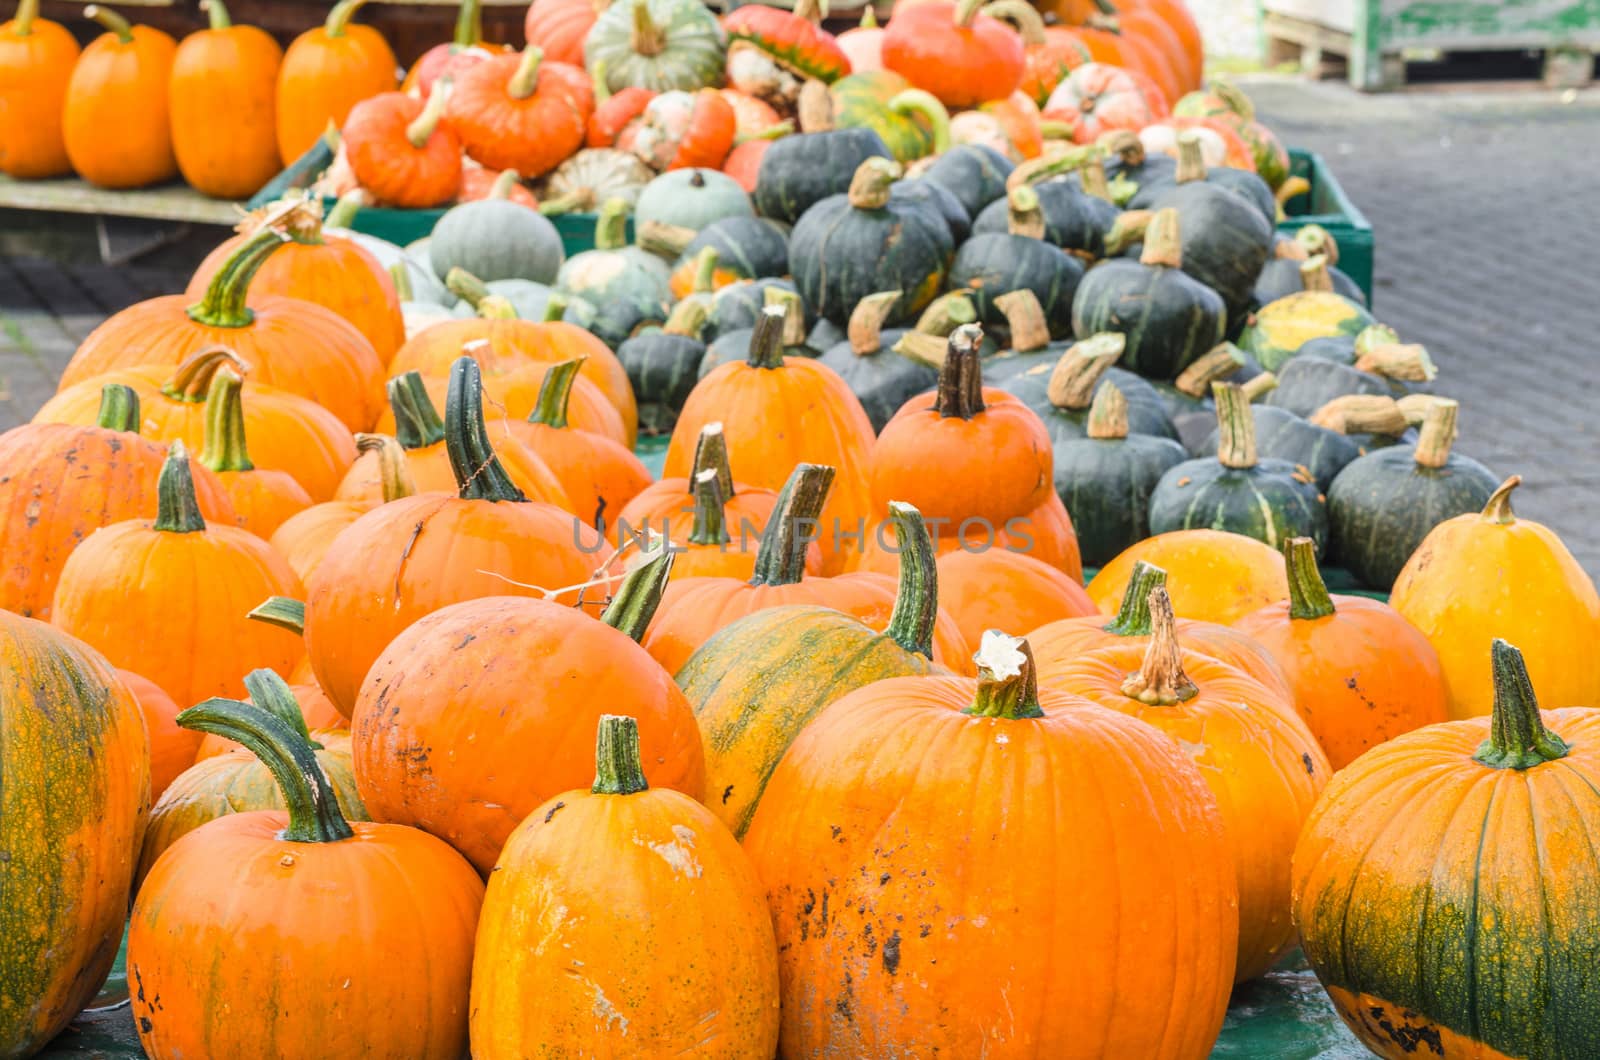 Various pumpkin varieties in diverse
Colors and shapes.